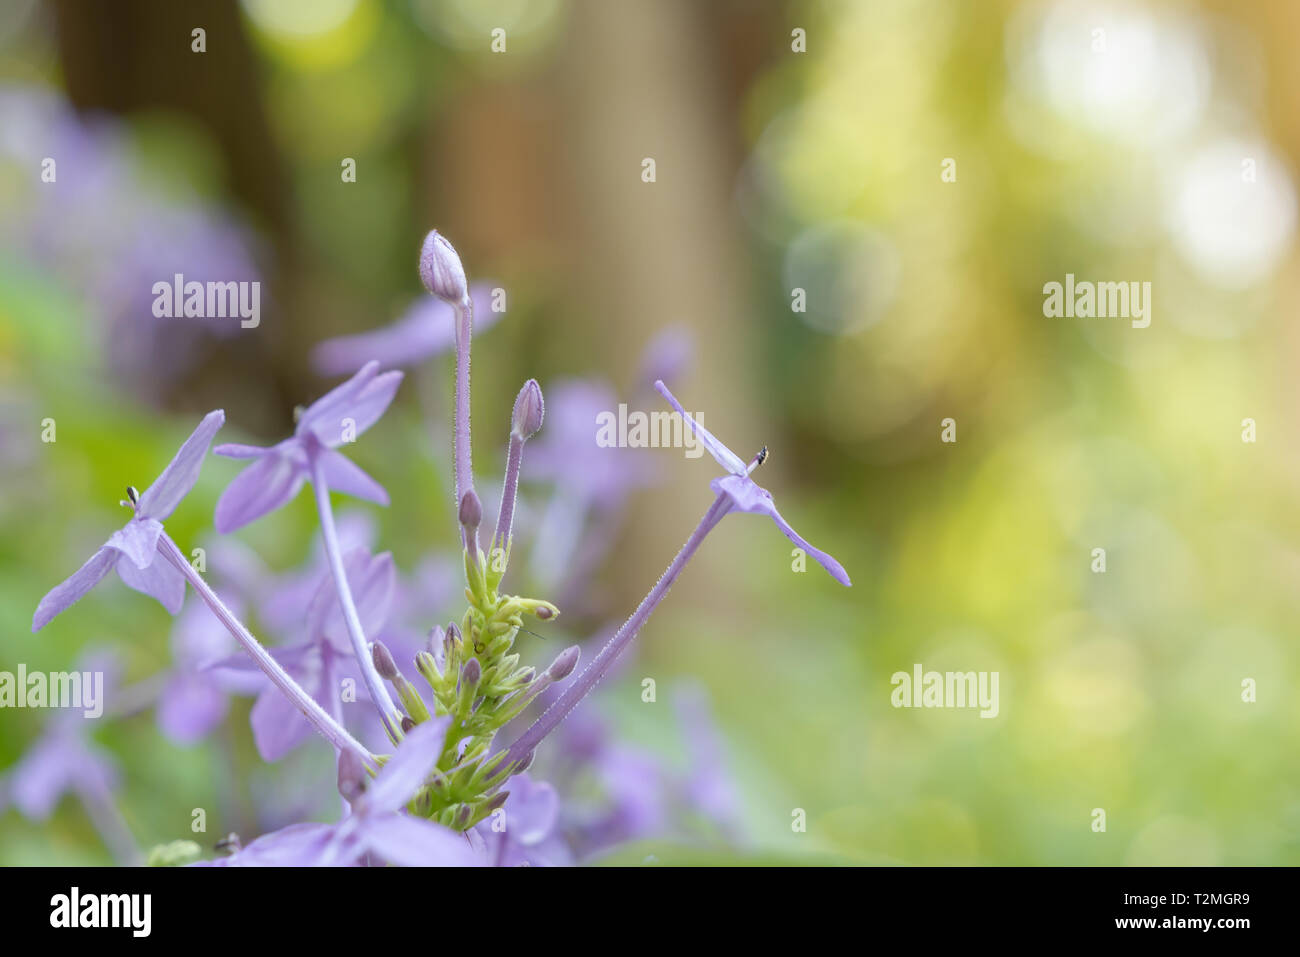 Violet Ixora or Pseuderanthemum andersonii Lindau background. Purple flowers on bokeh and blurred backgrounds with copy space. Small shrubs break many Stock Photo